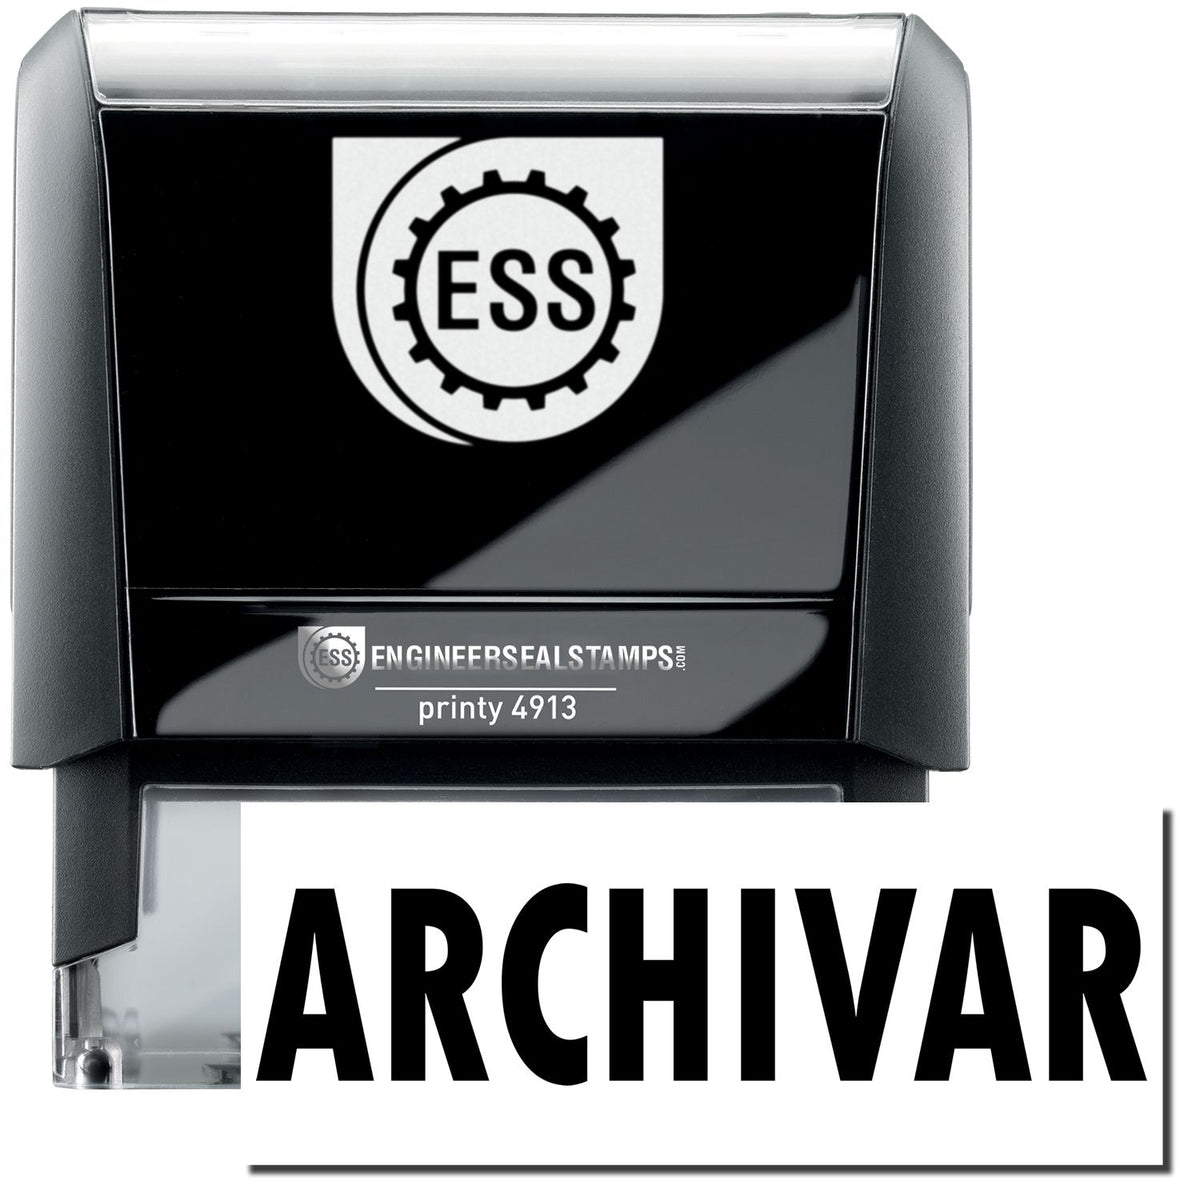 A self-inking stamp with a stamped image showing how the text &quot;ARCHIVAR&quot; in a large font is displayed by it after stamping.